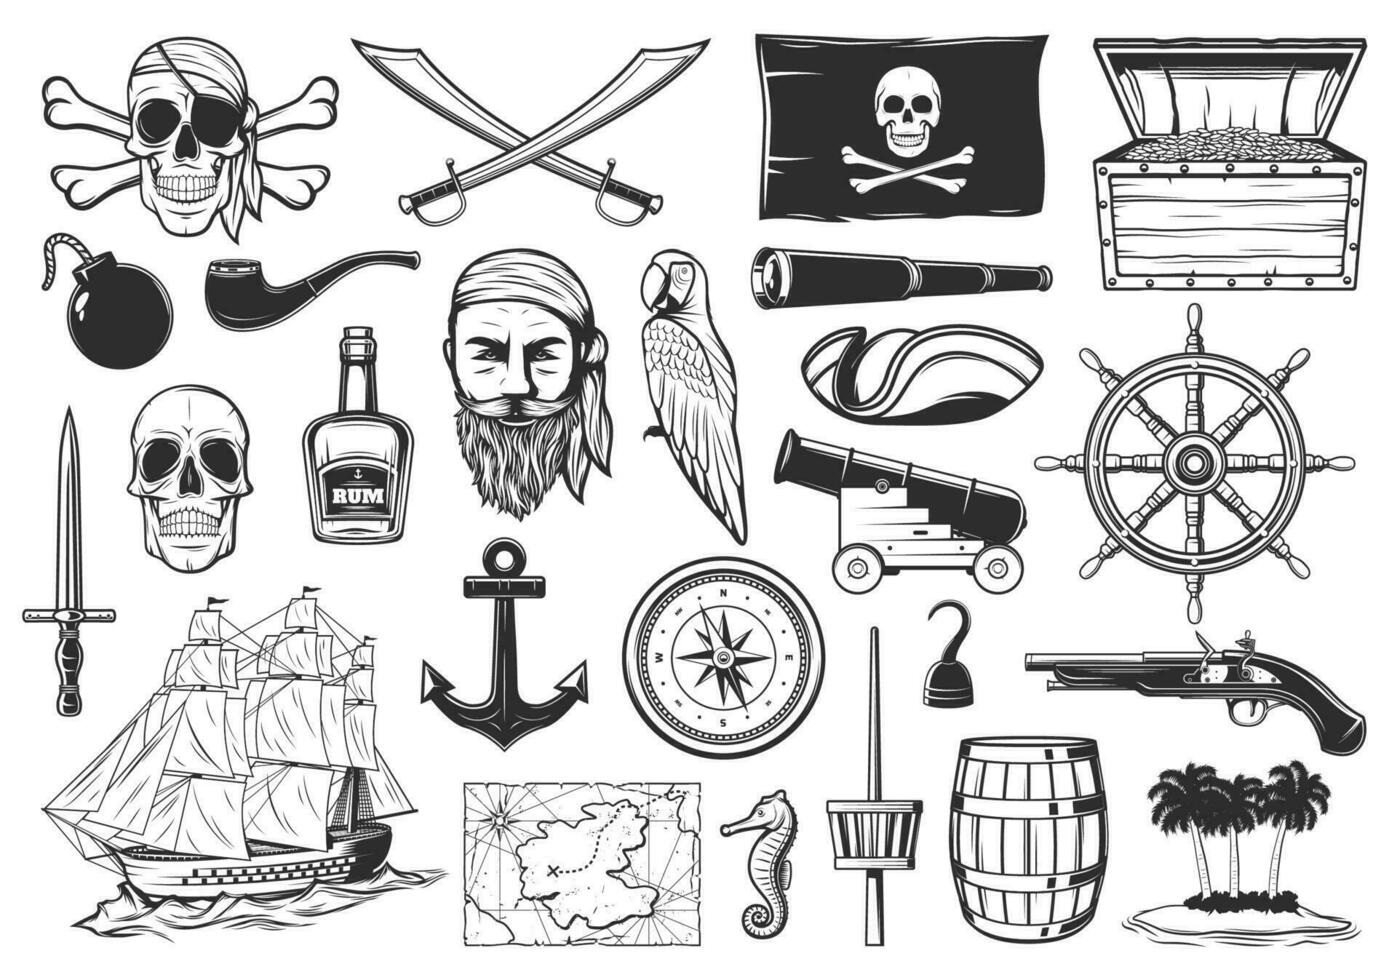 Pirates and treasures map icons, Caribbean island vector